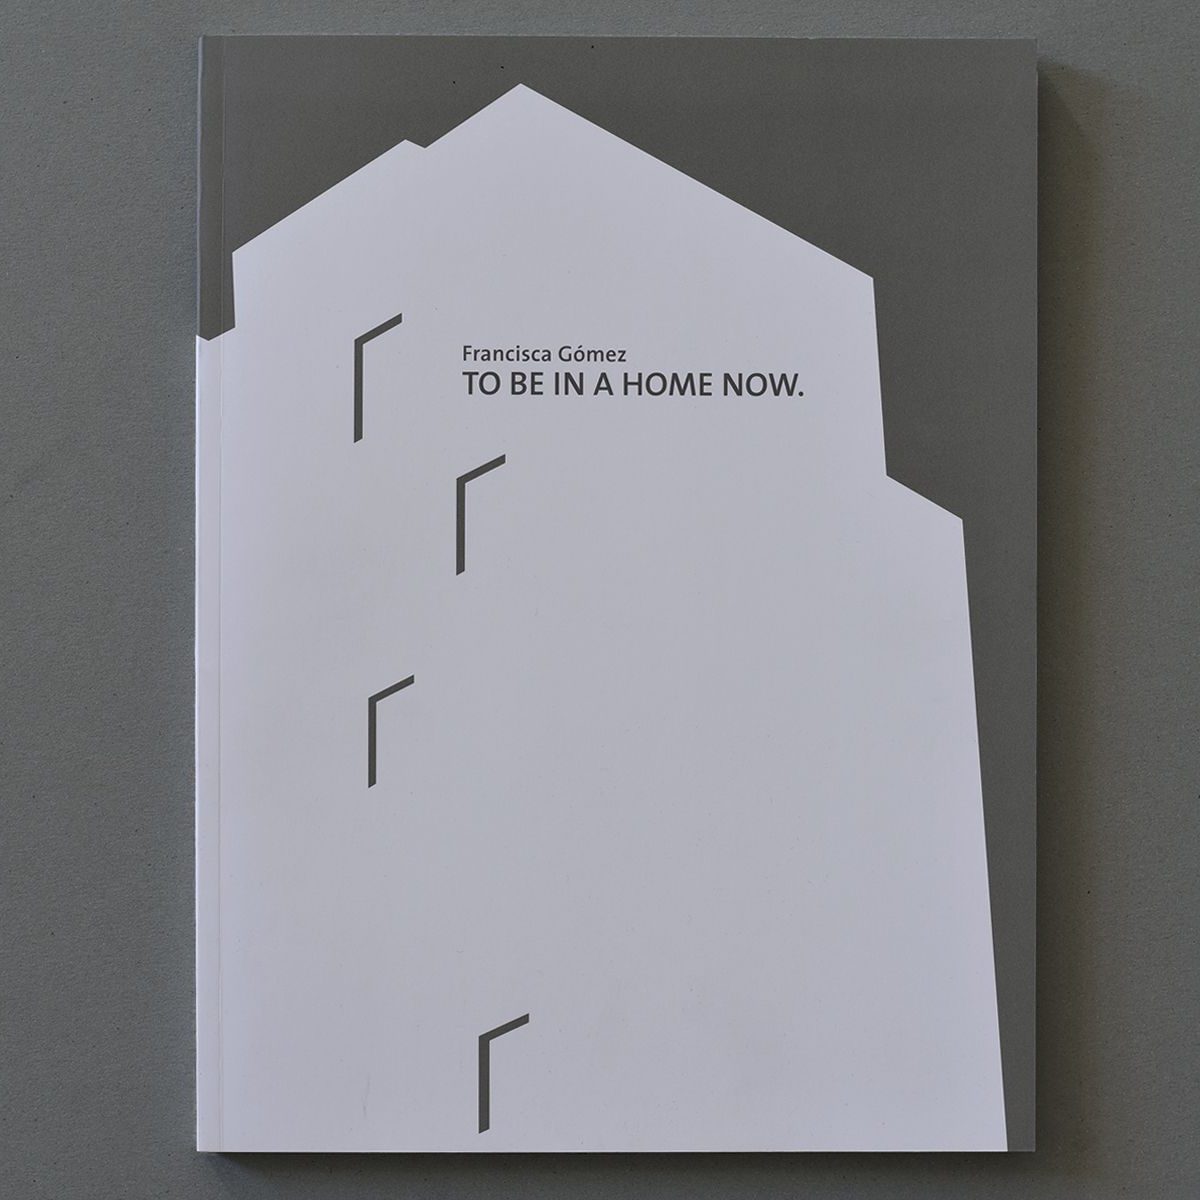 Katalog Francisca Gómez – To be in a Home now.